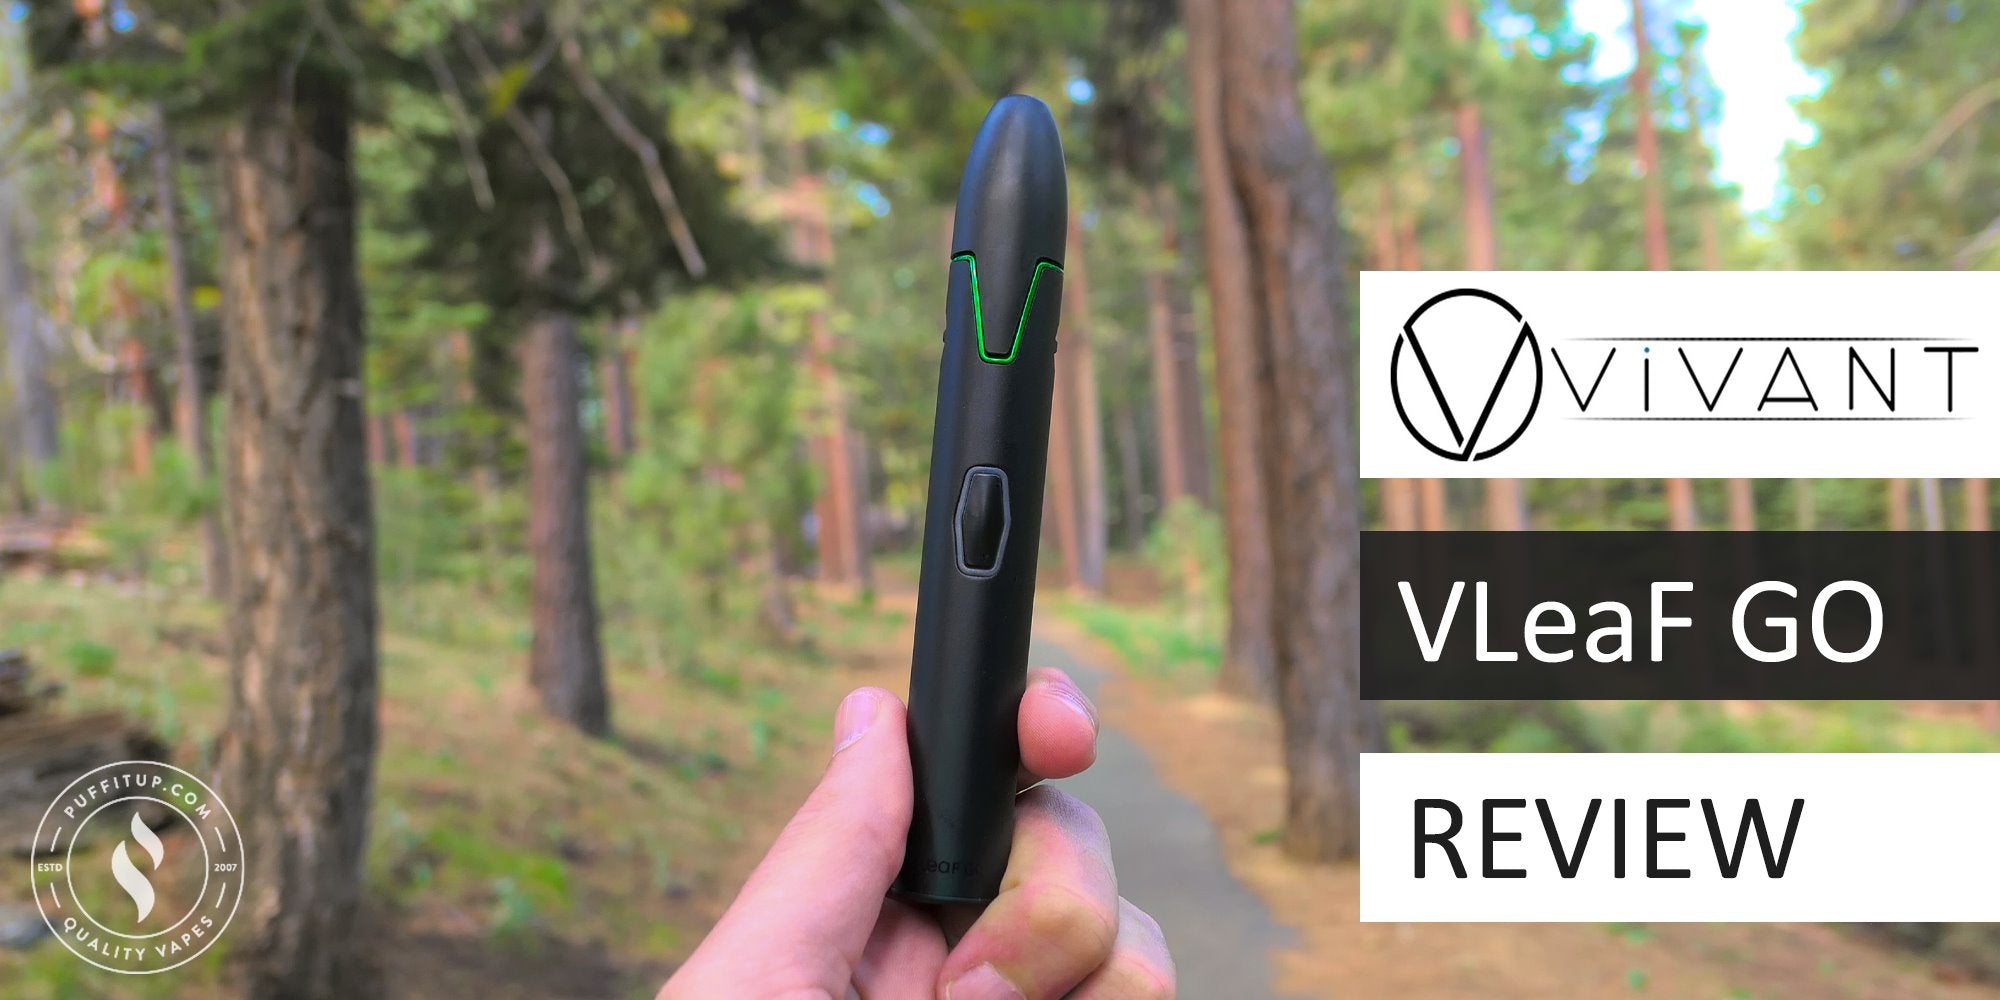 Comprehensive Review of the Vivant VLeaf GO by PUFFITUP – PuffItUp